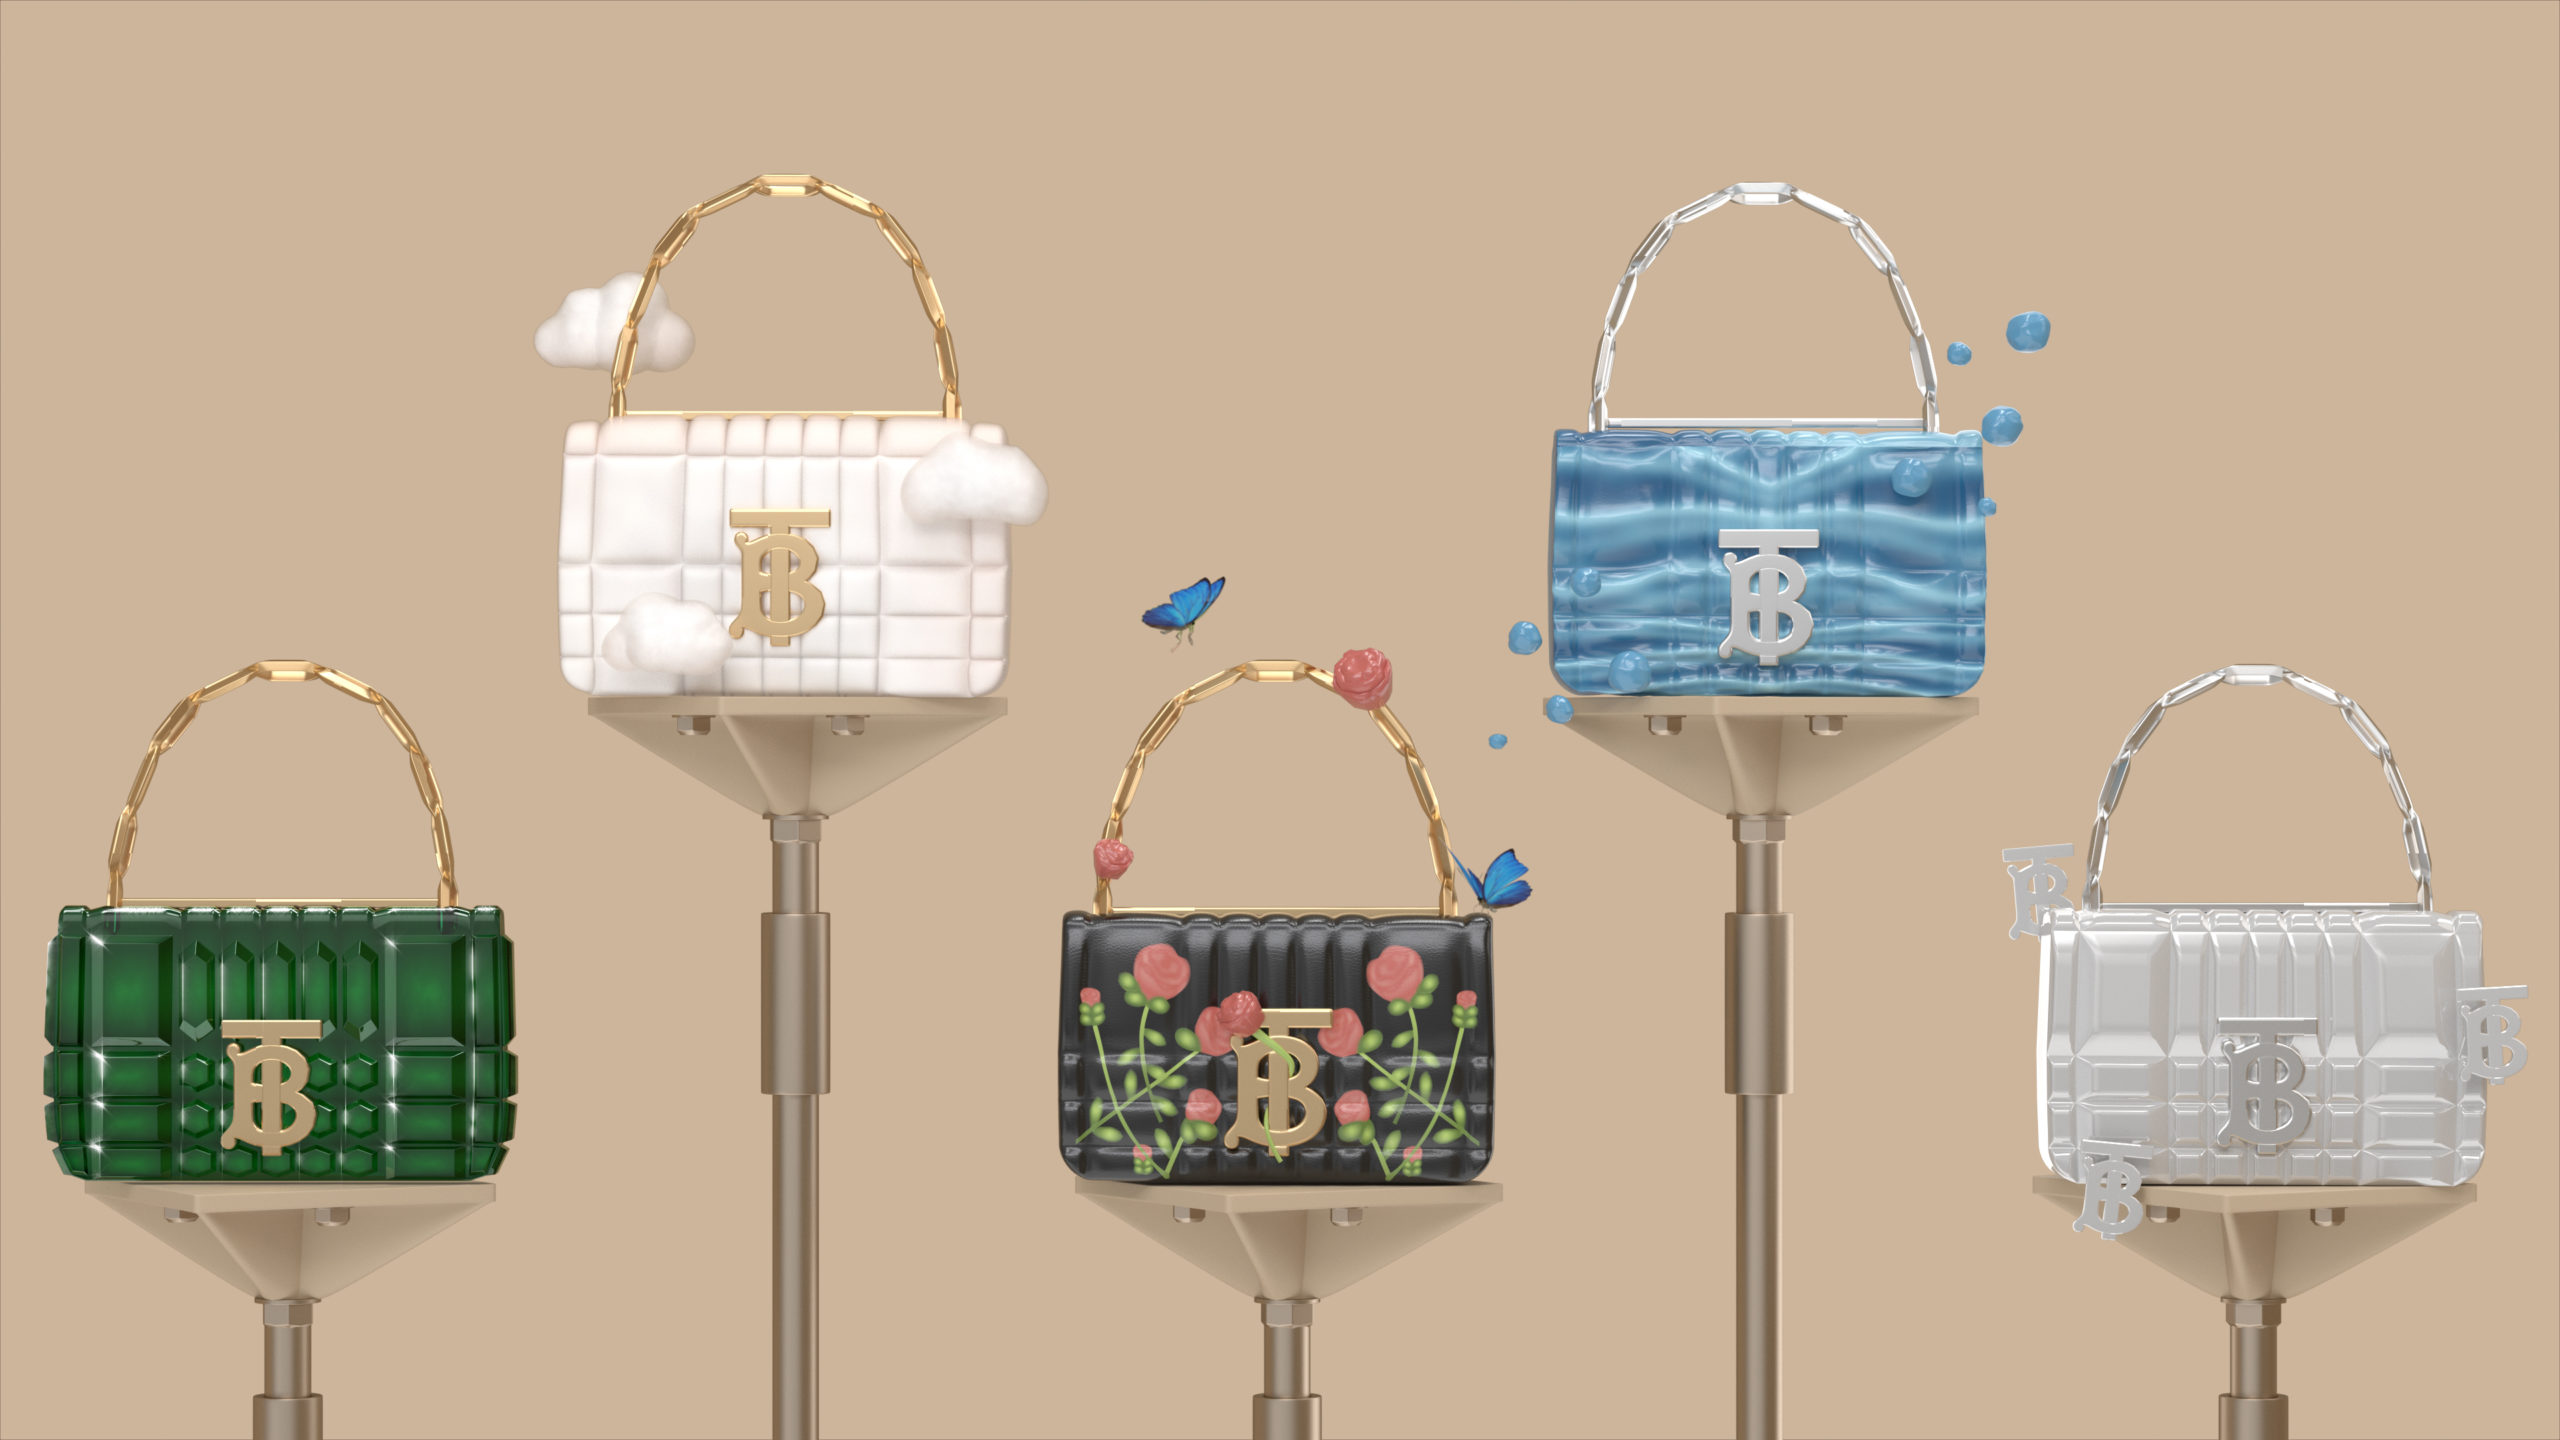 The Louis Vuitton summer collection brings a fresh and colorful